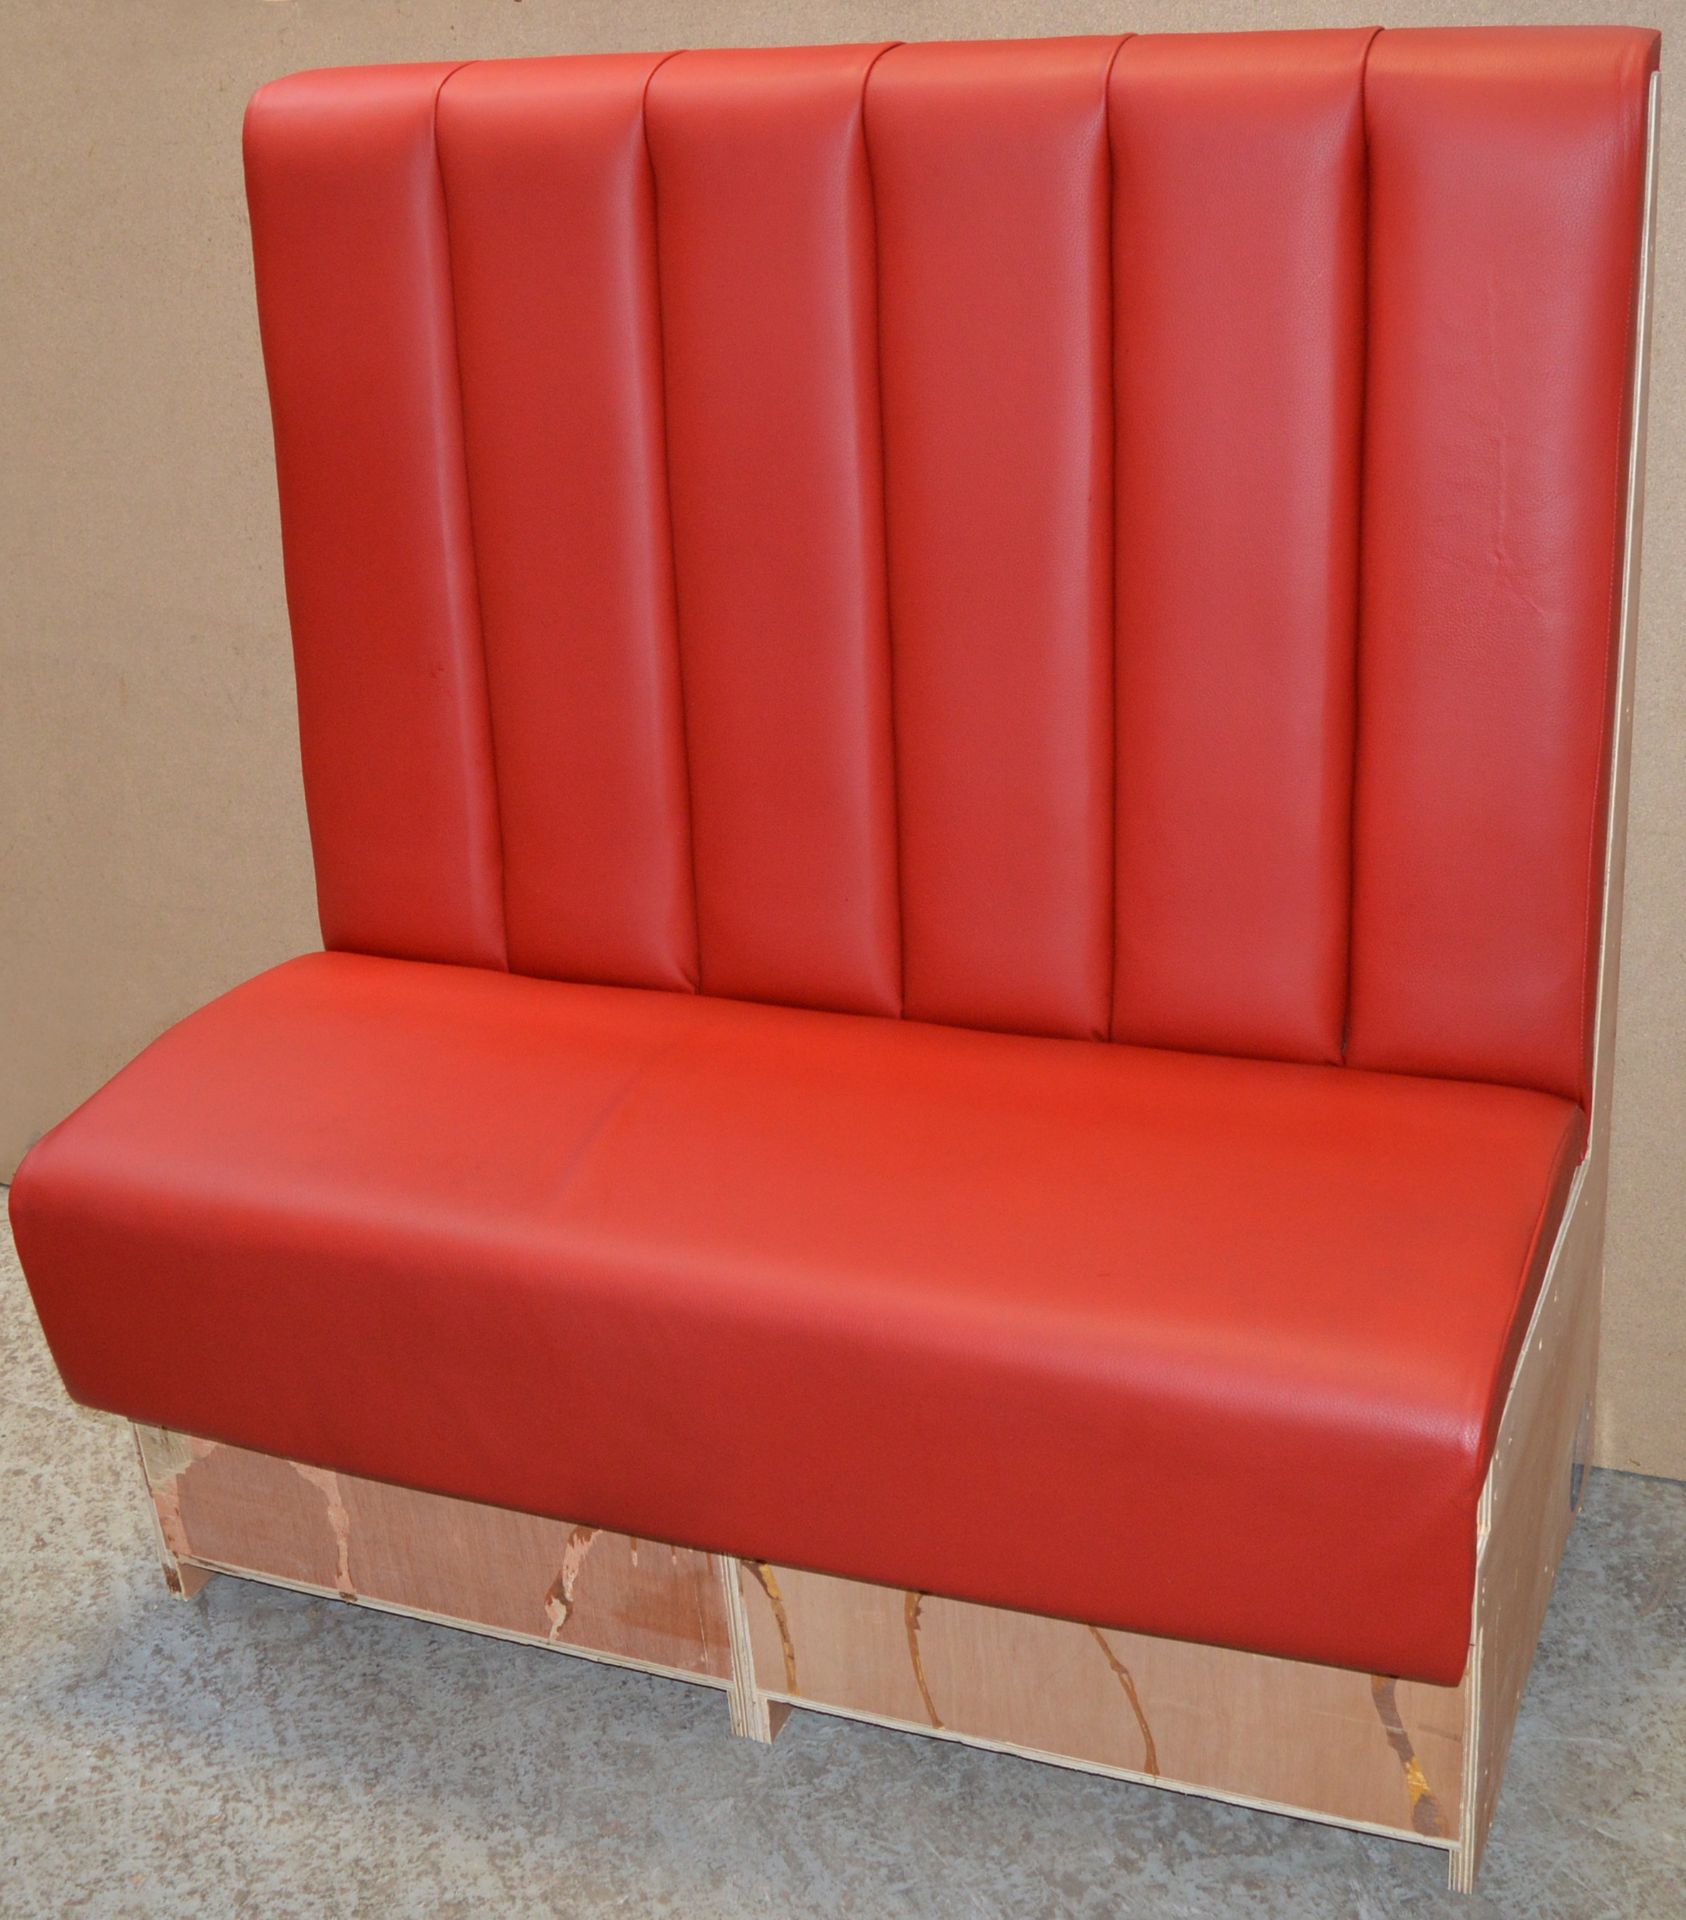 1 x High Back Single Seating Bench Upholstered in Red Leather - Sits upto Two People - High - Image 2 of 17